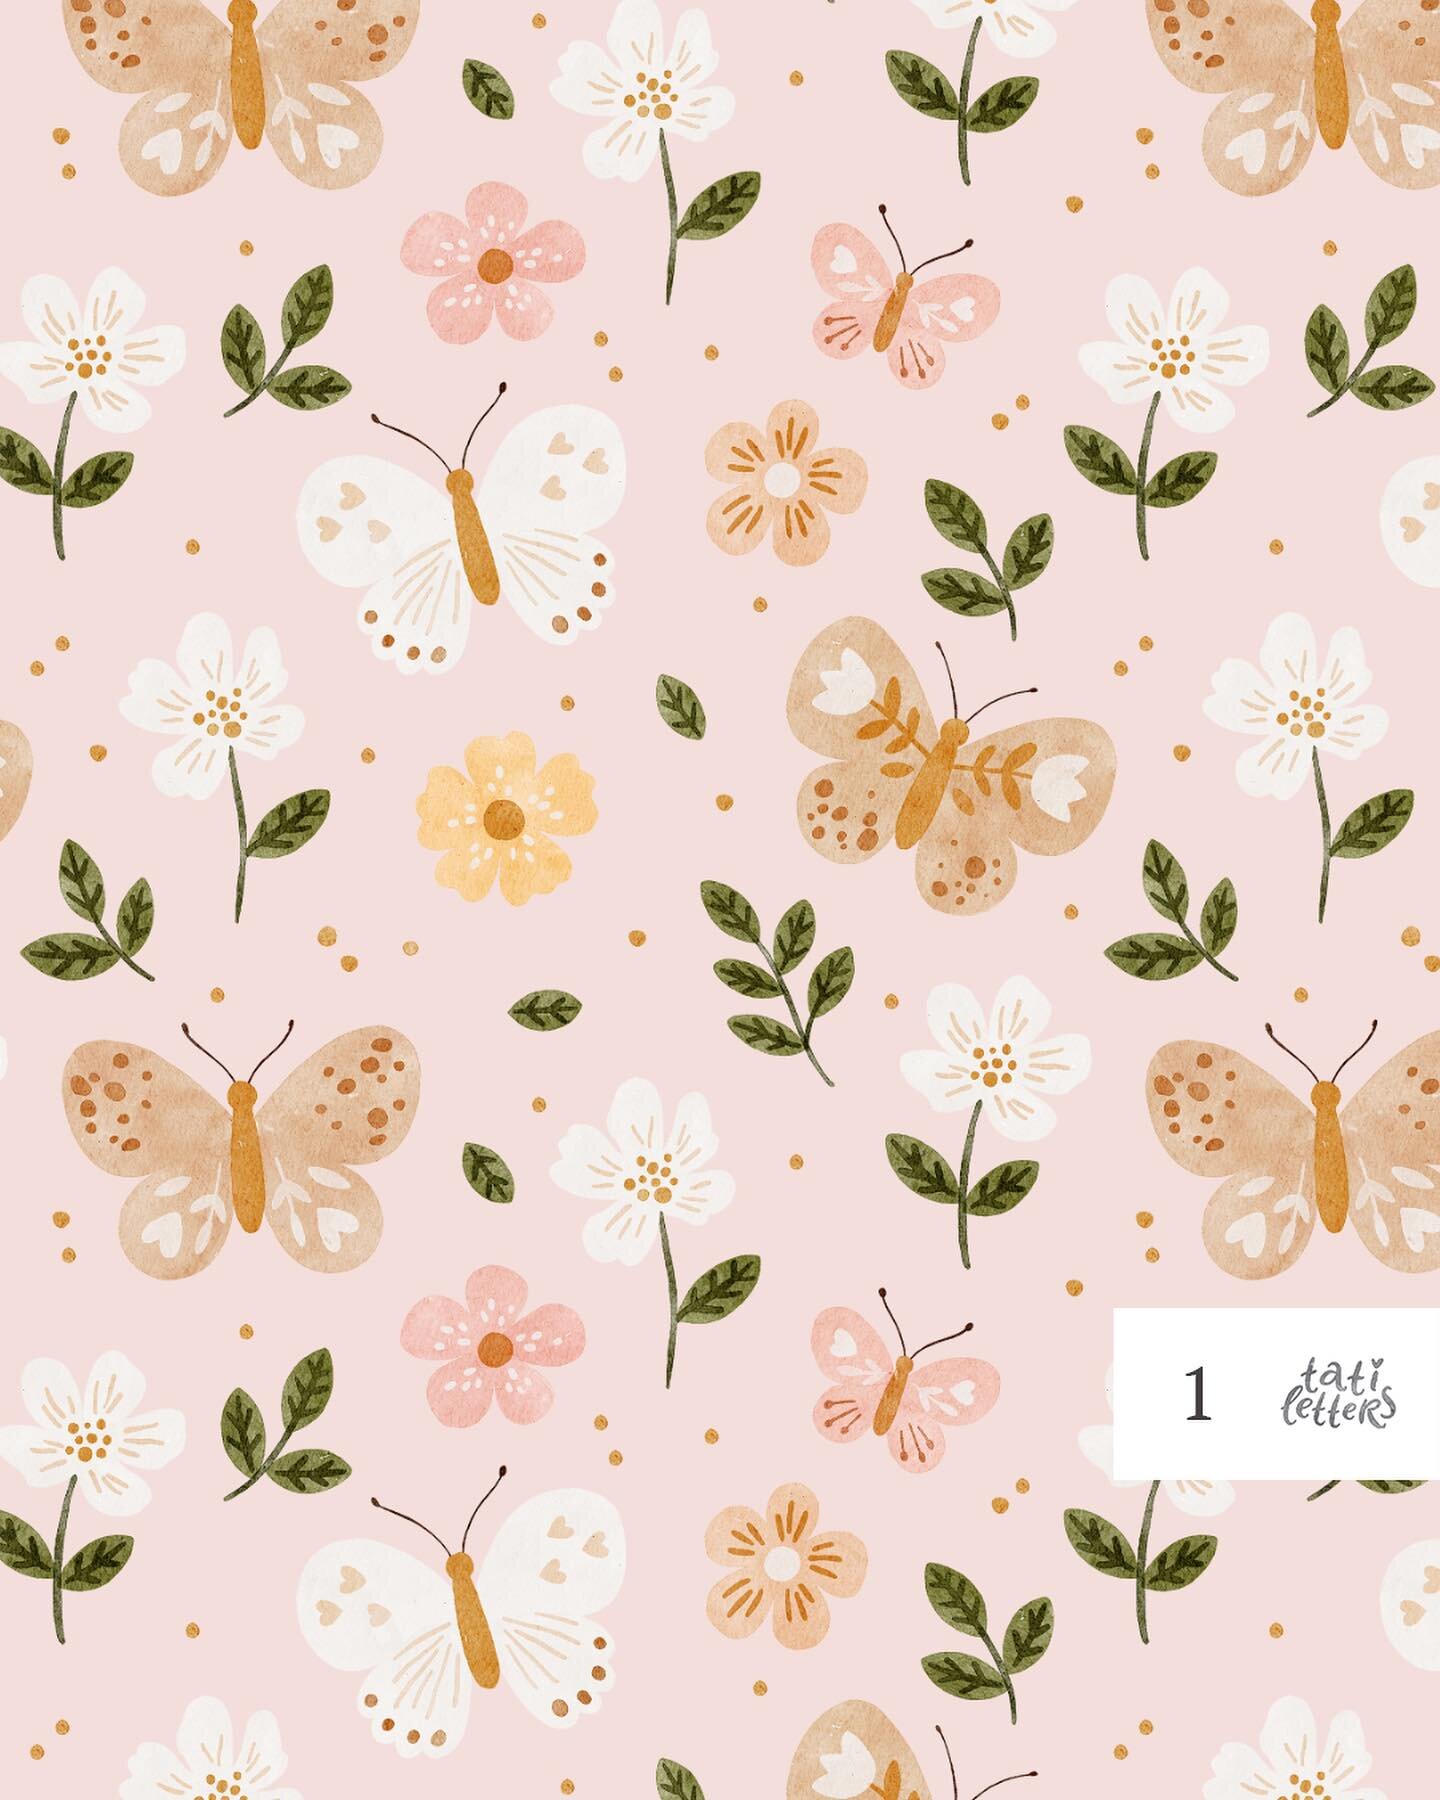 Butterfly 🌸 Exclusive seamless pattern
🖤 Comment to claim for colour
&euro;35 per exclusive colourway:
⠀
01 
02 
03 
04 
05 
06 
07 
08 
⠀
16x16 cm tile, JPEG 300dpi
Background color can be tweaked
Clipart &euro;10

Payment via Paypal
By claiming a